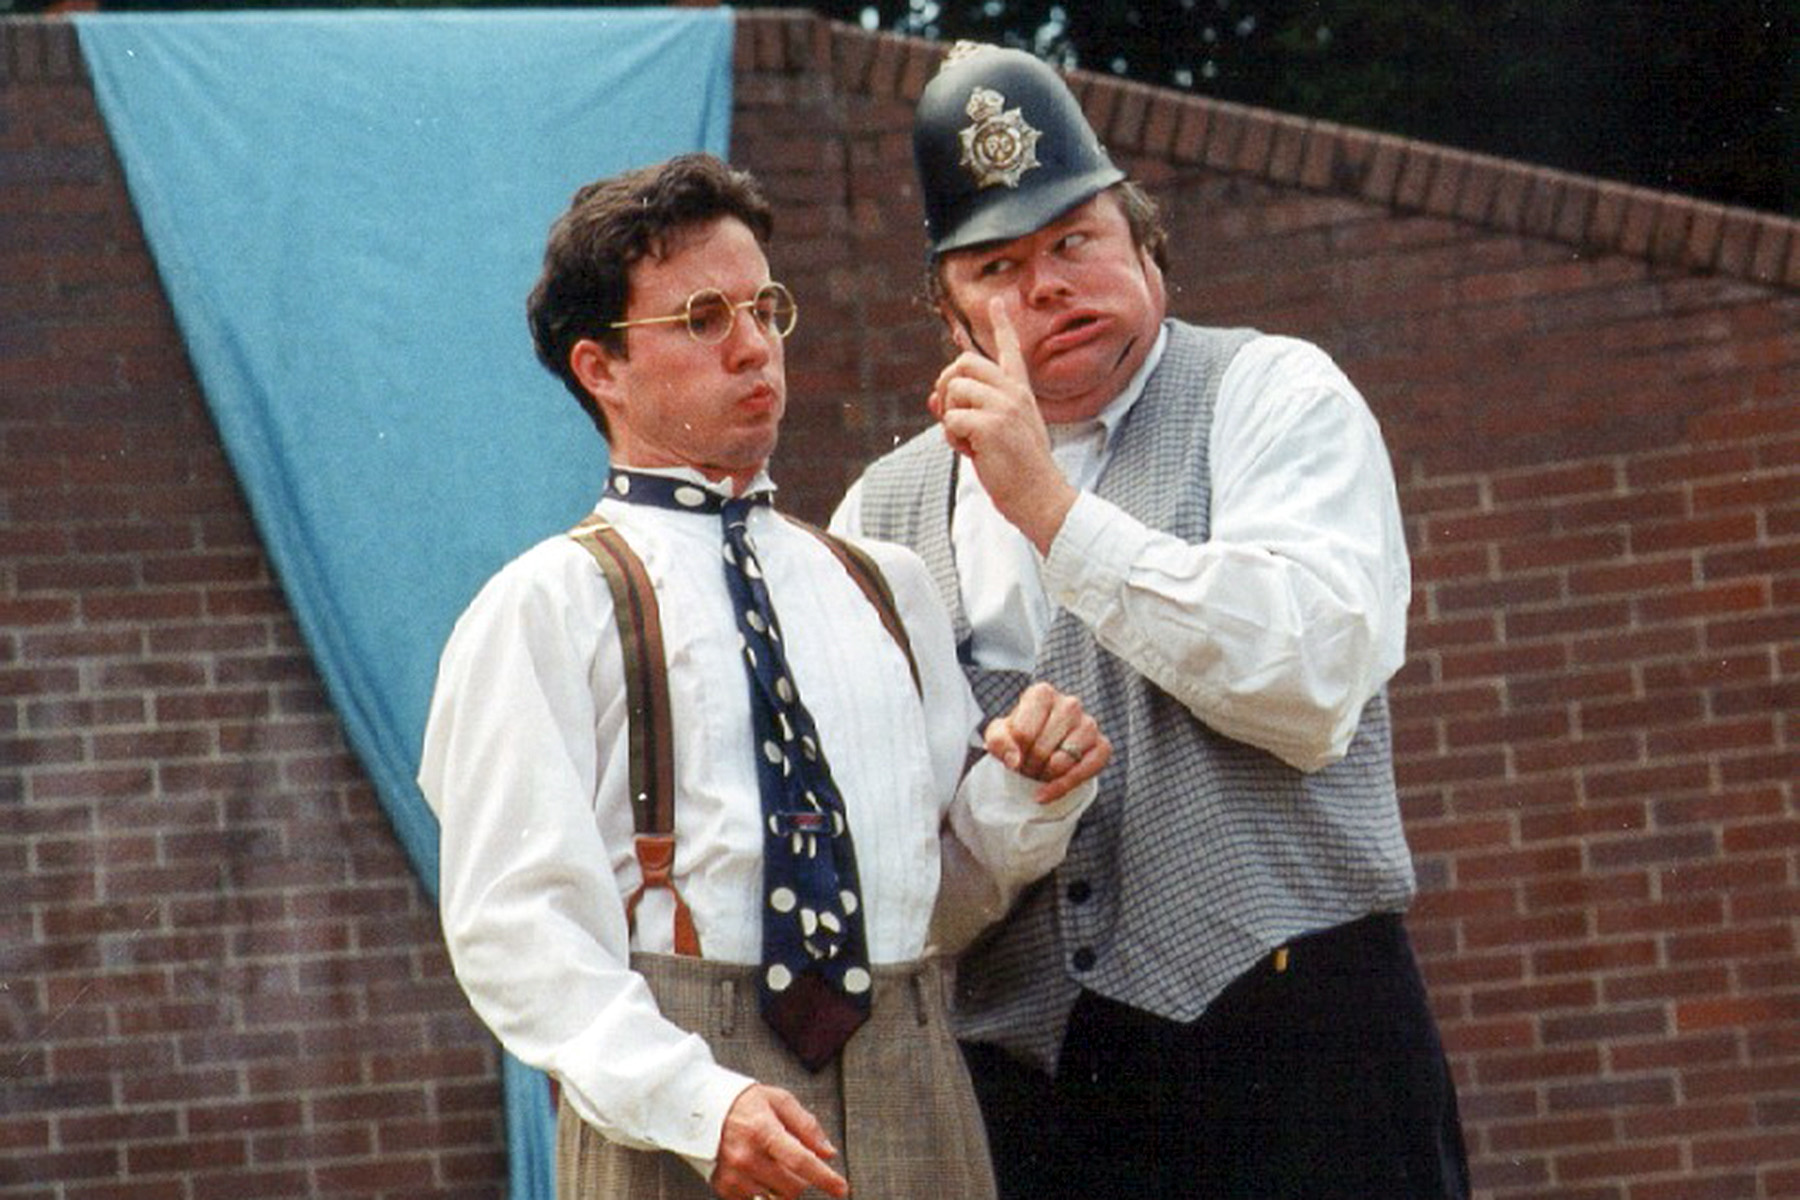 Comedy of Errors 1999 - Jason Marr and Stephen Grenley